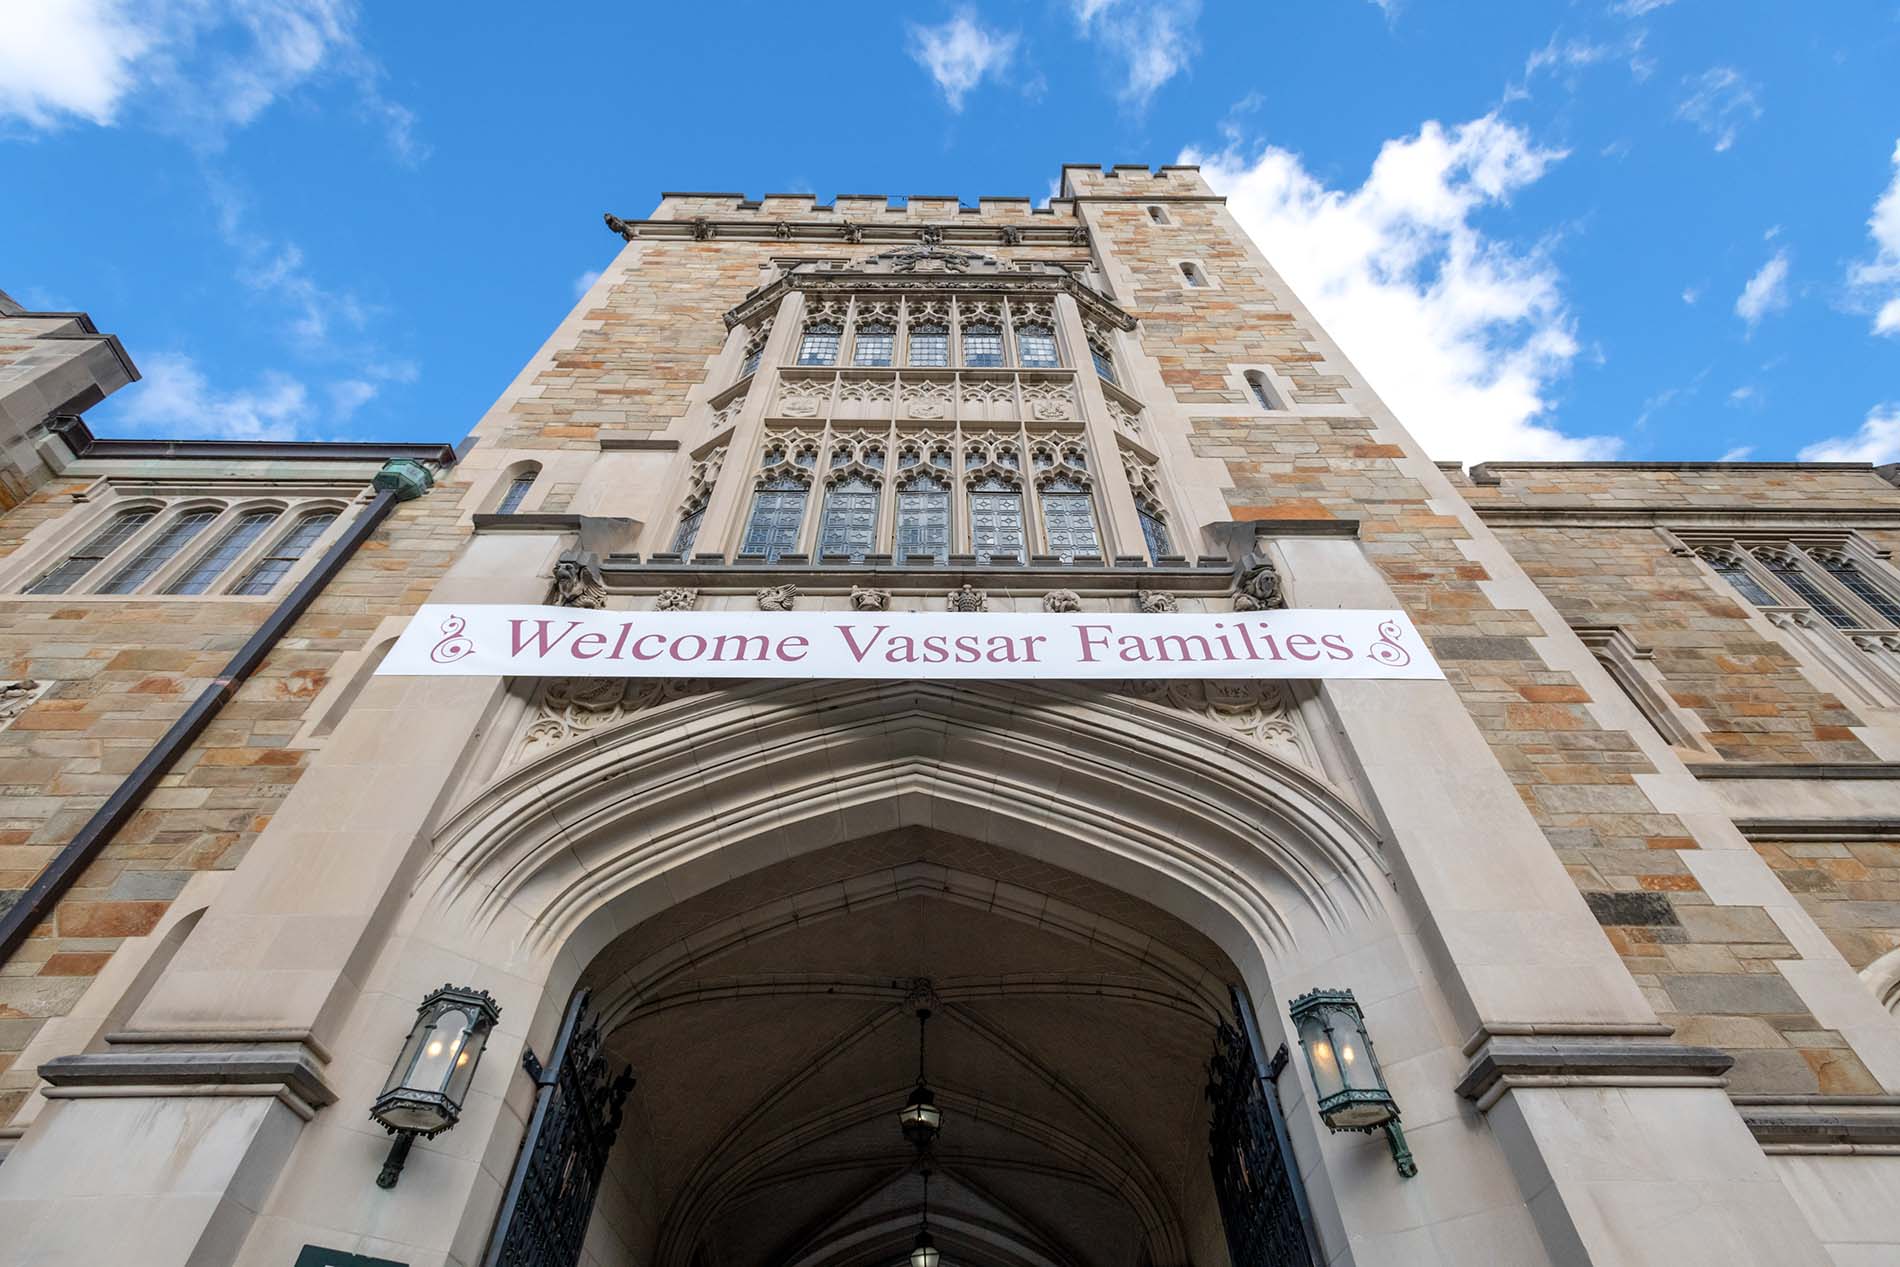 Main Gate at Vassar College with Families Weekend Banner